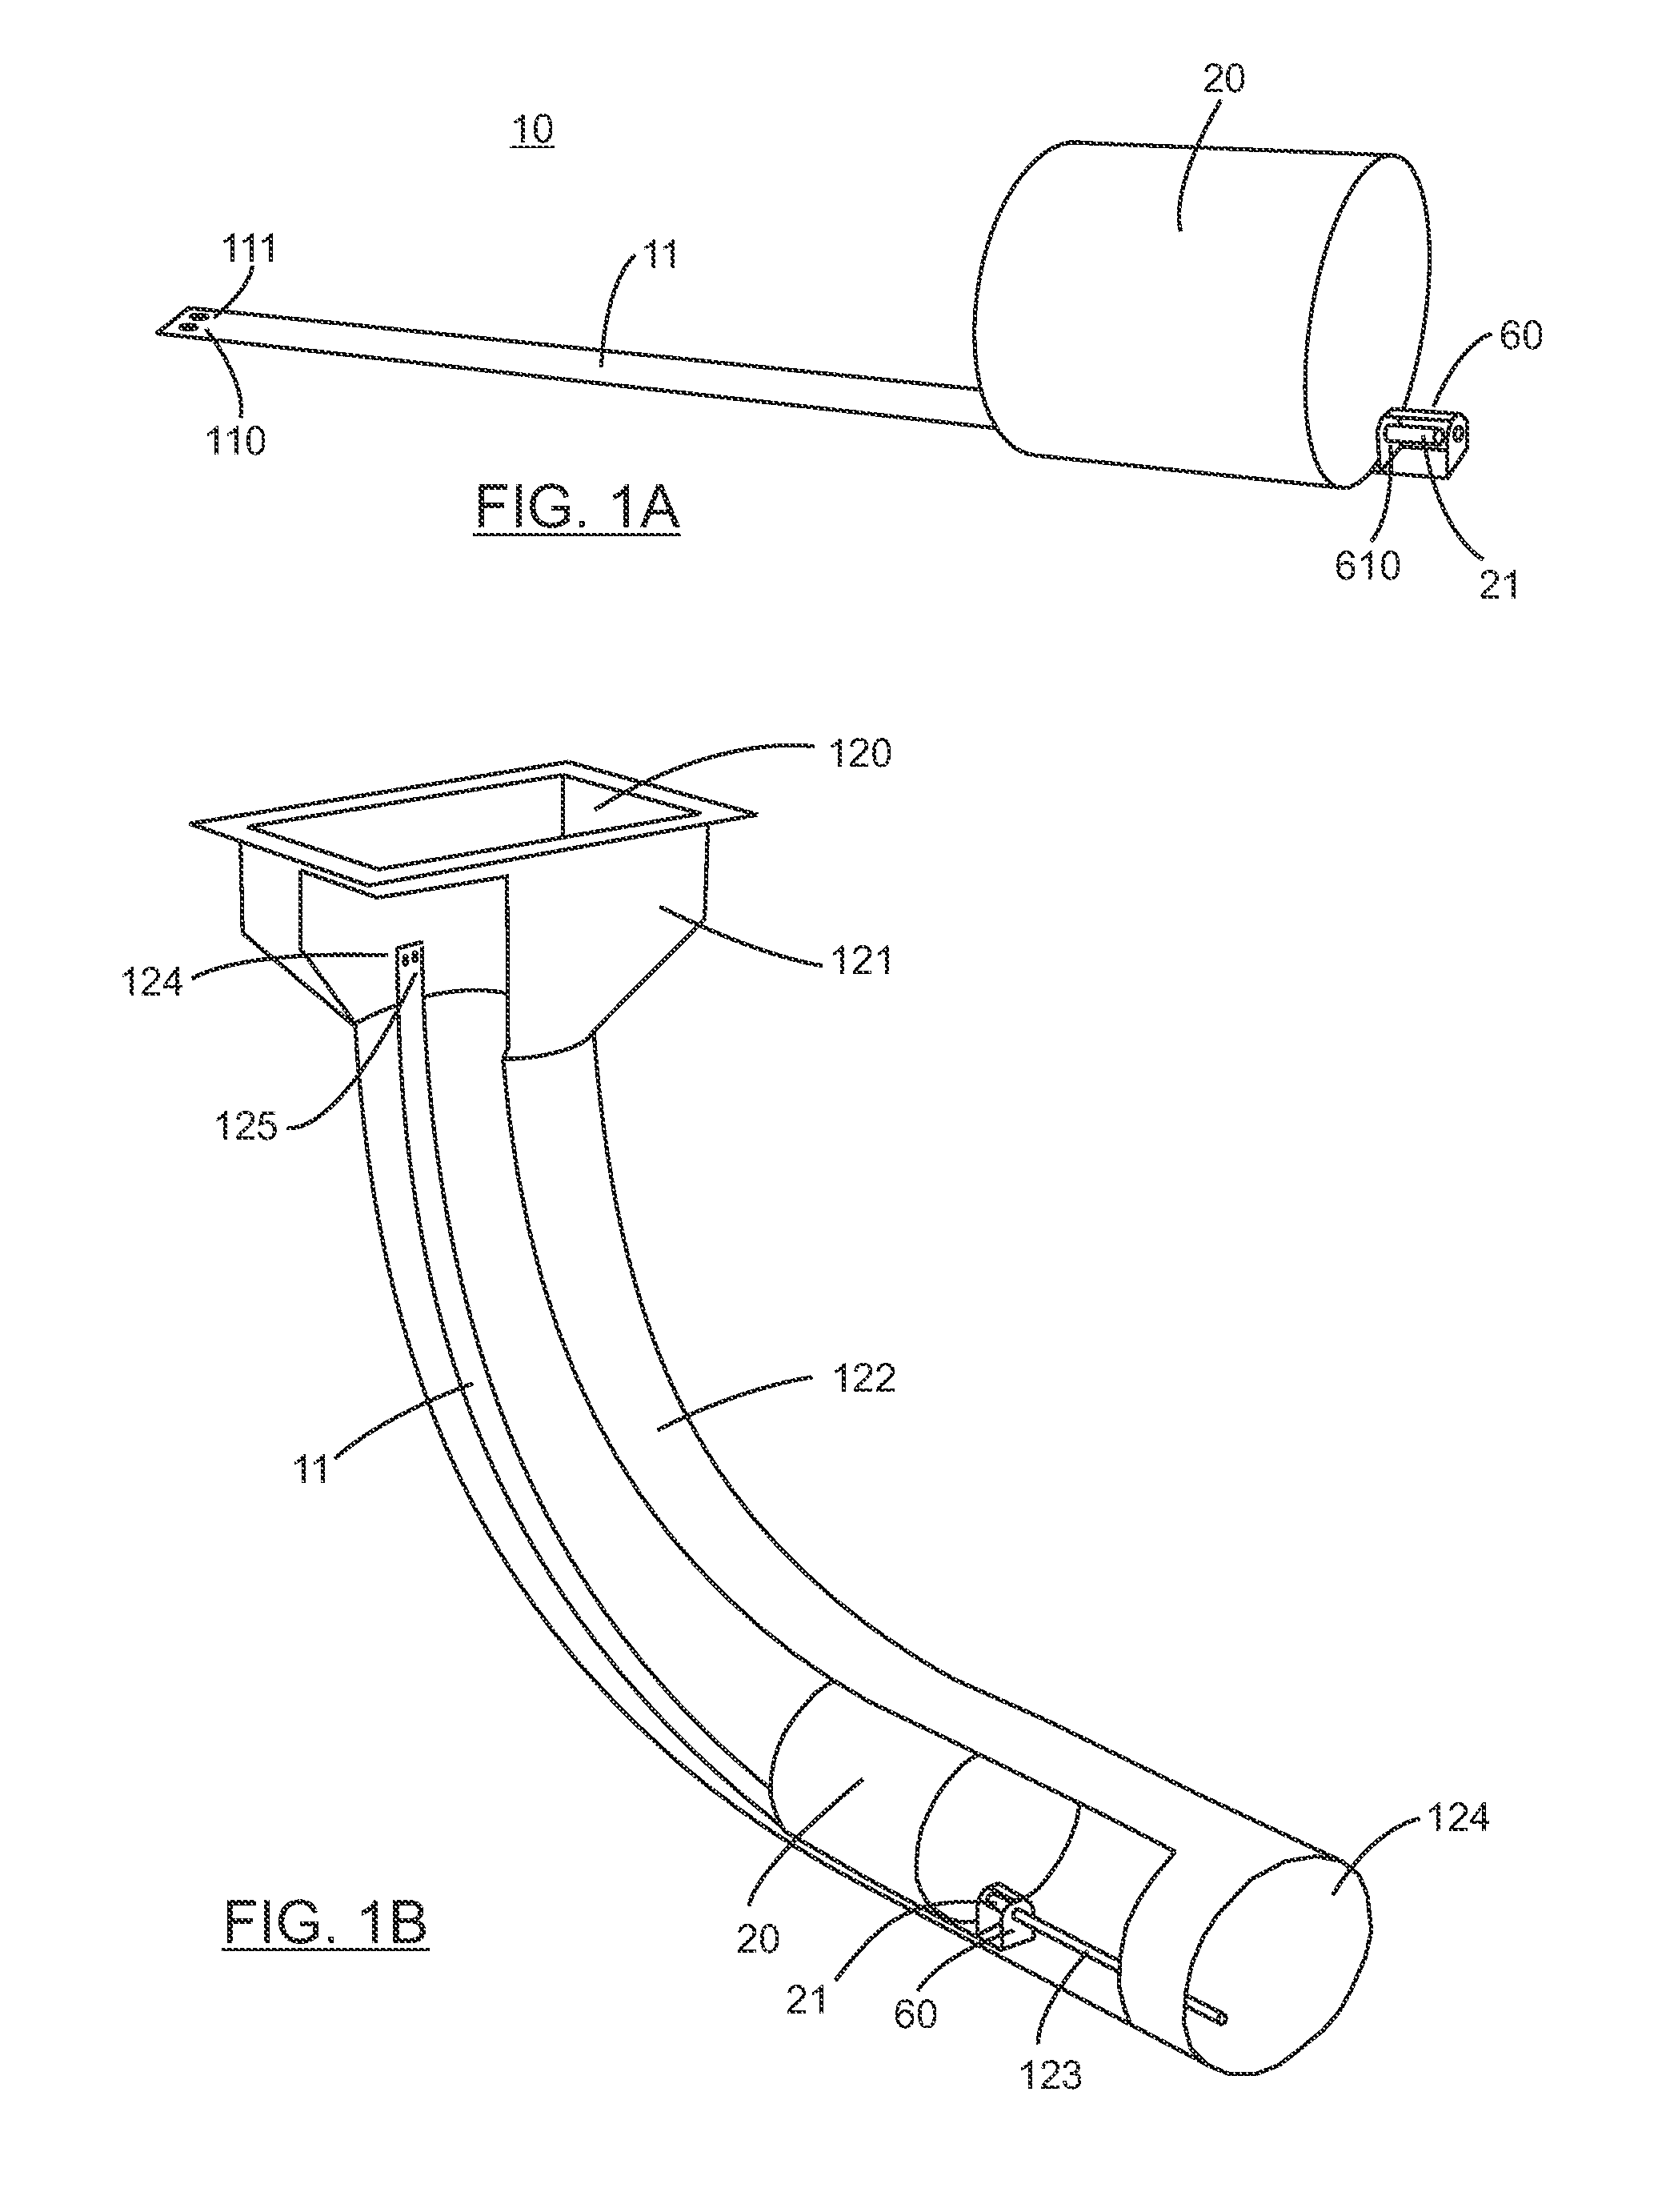 Vent-blocking inflatable bladder assembly for a HVAC zone control system